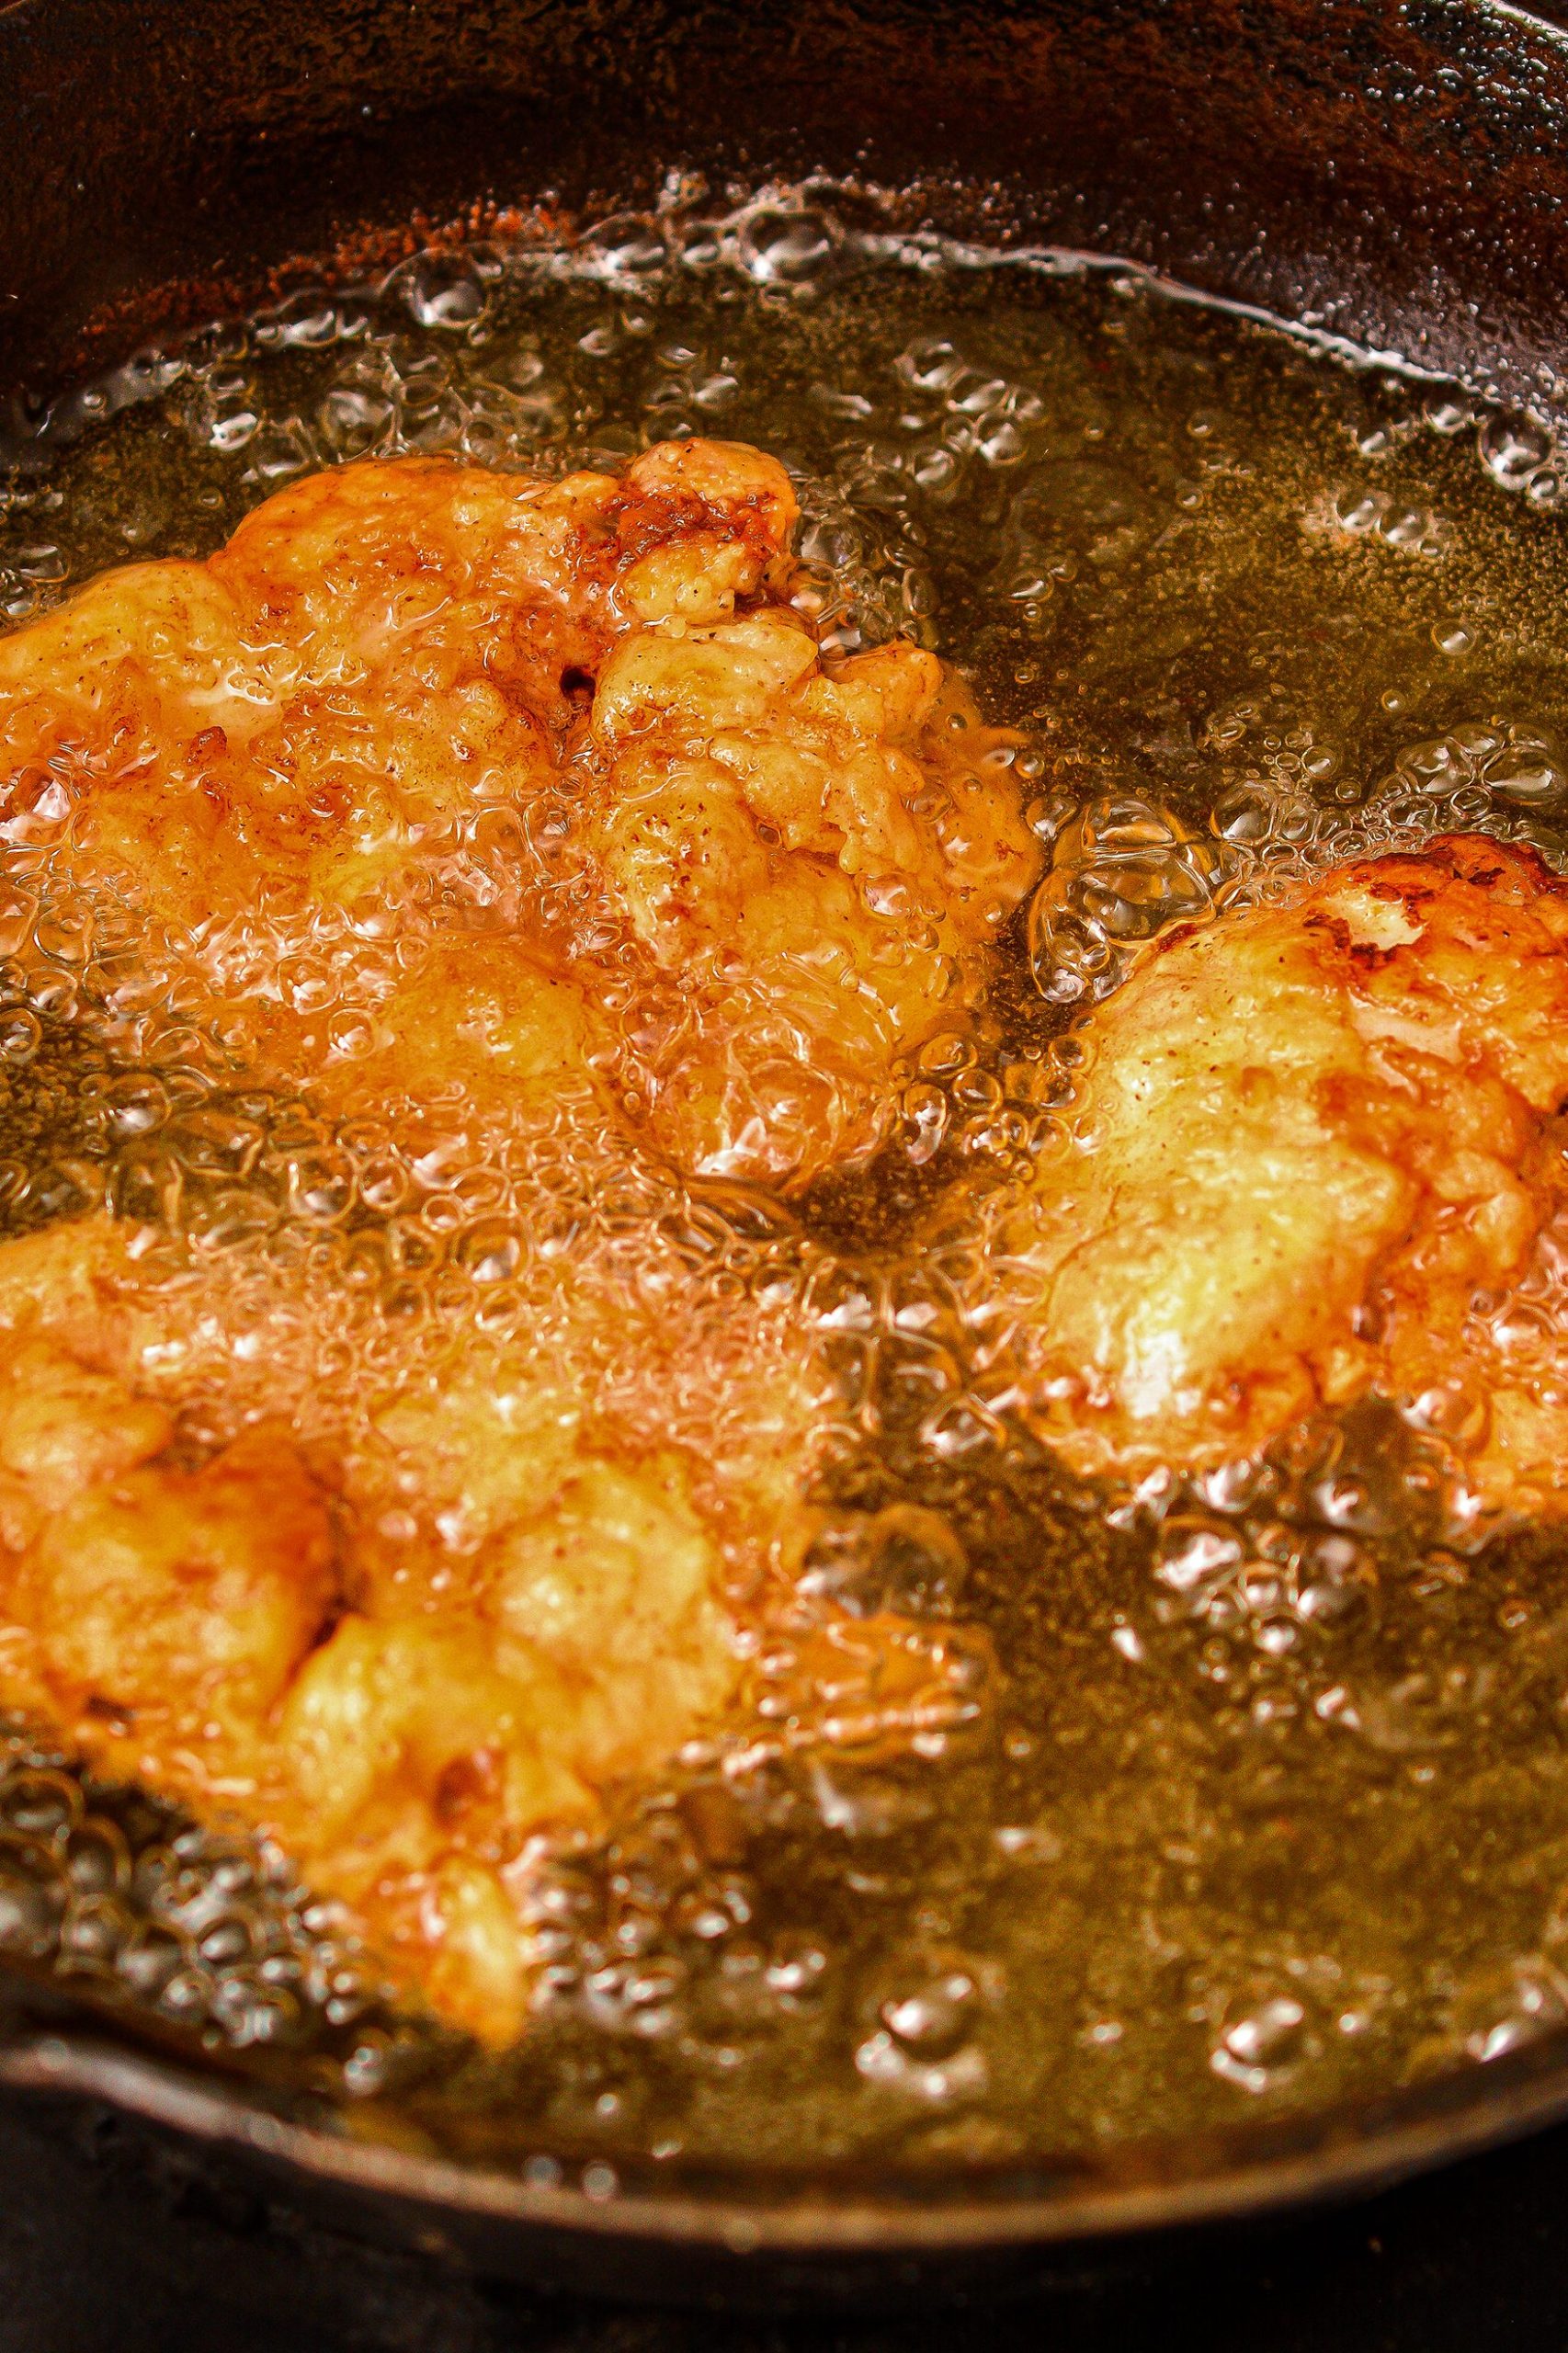 Fry the chicken evenly for 5-6 minutes per side.